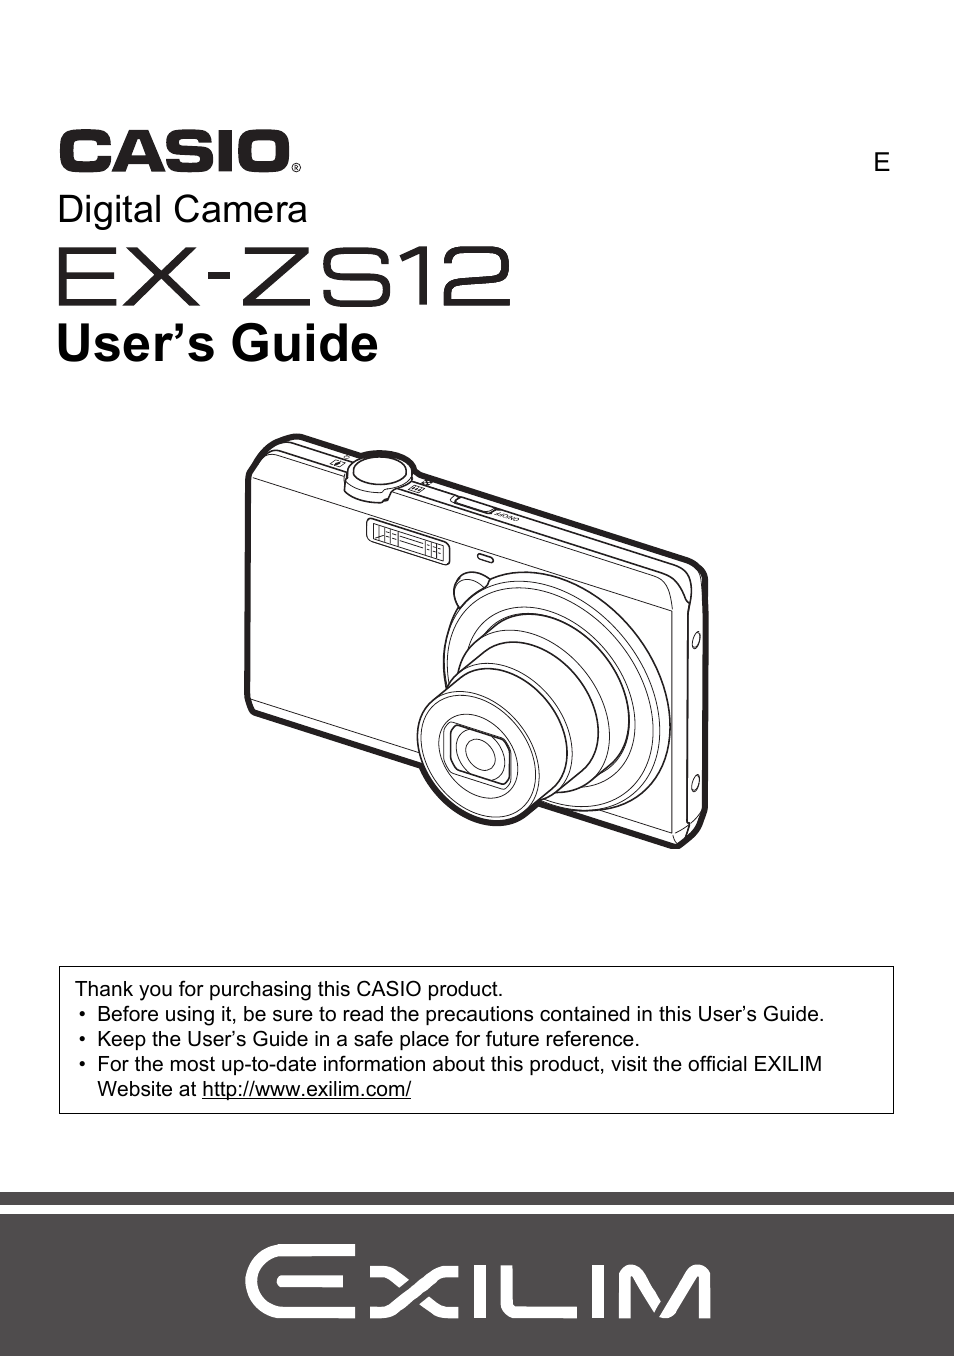 Casio EX-ZS12 User Manual | 136 pages | Also for: EX-Z28, EX-ZS6, EXILIM  EX-Z28, EXILIM EX-ZS6